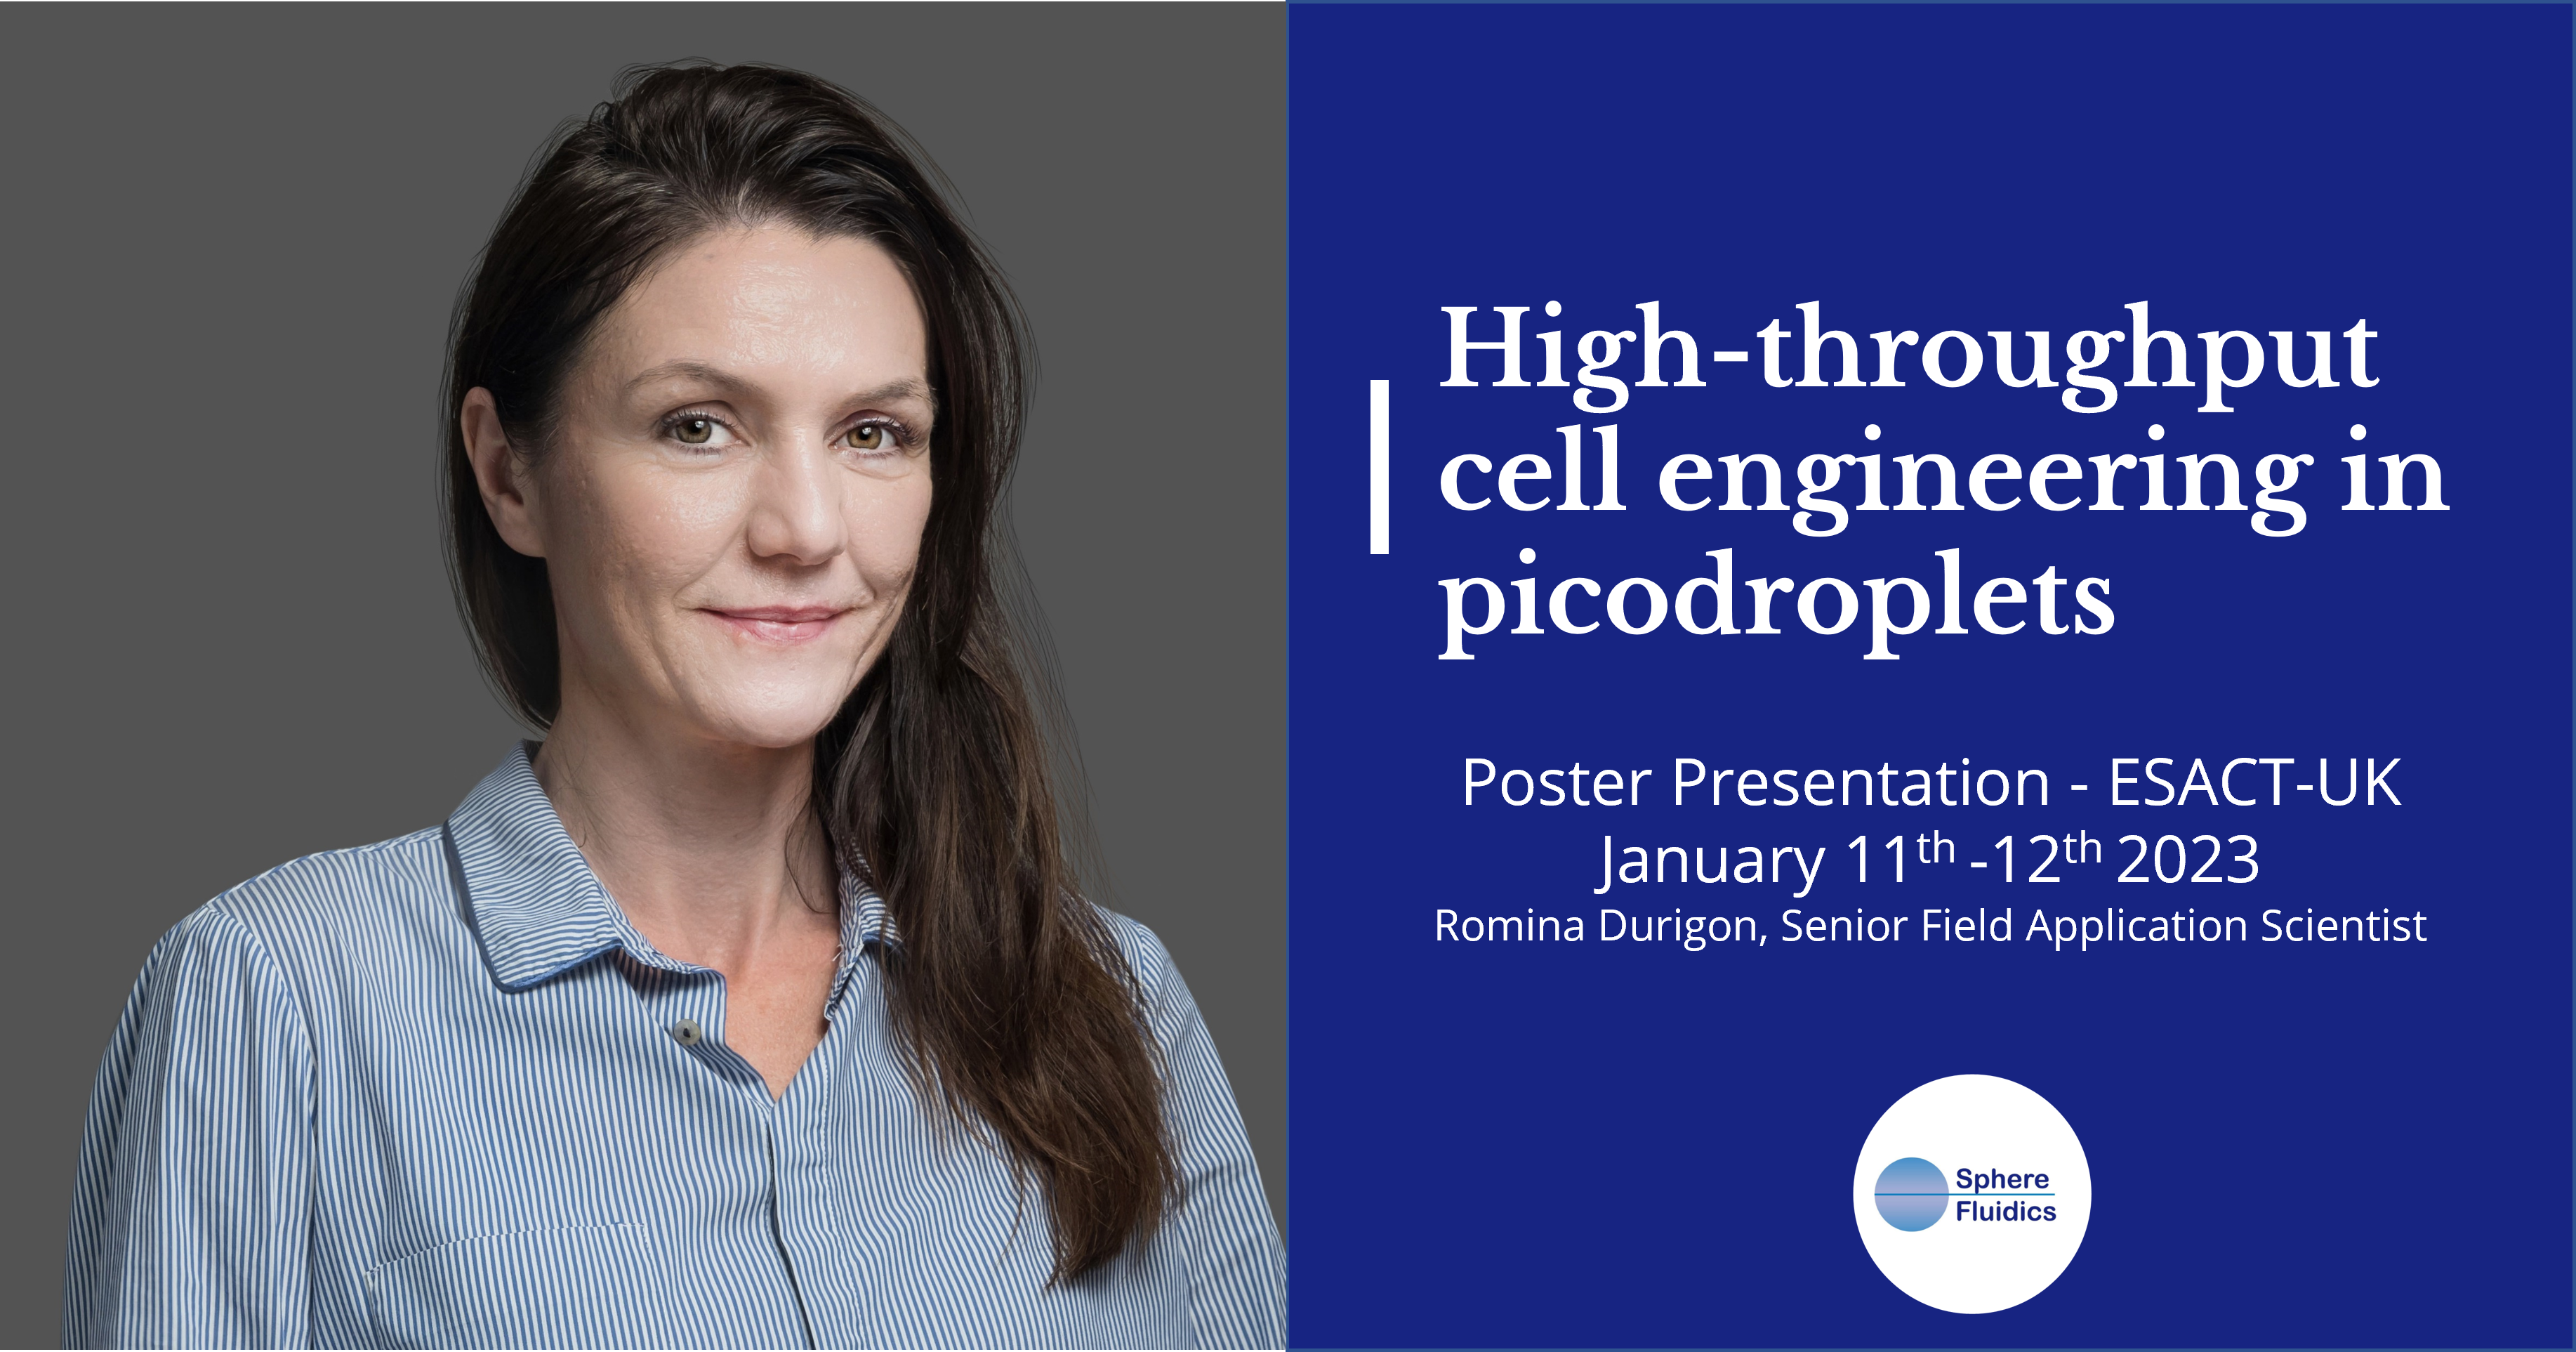 Join Romina Durigon at the 33rd Annual Meeting ESACT- UK 2023 this week where she will be presenting her poster "High-throughput cell engineering in picodroplets ". You can also drop by our booth to find out more! 